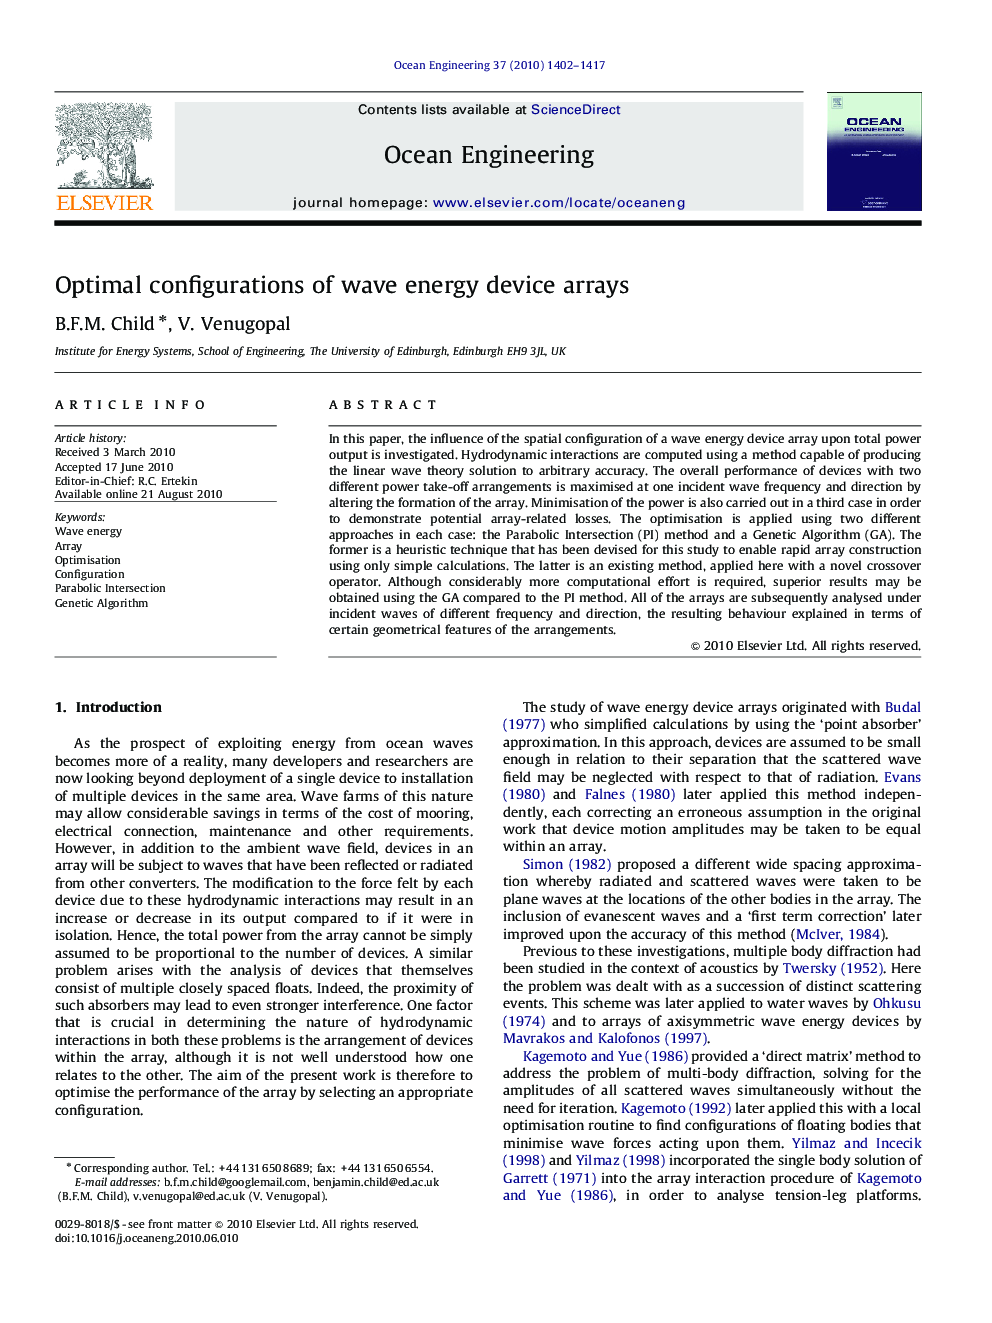 Optimal configurations of wave energy device arrays